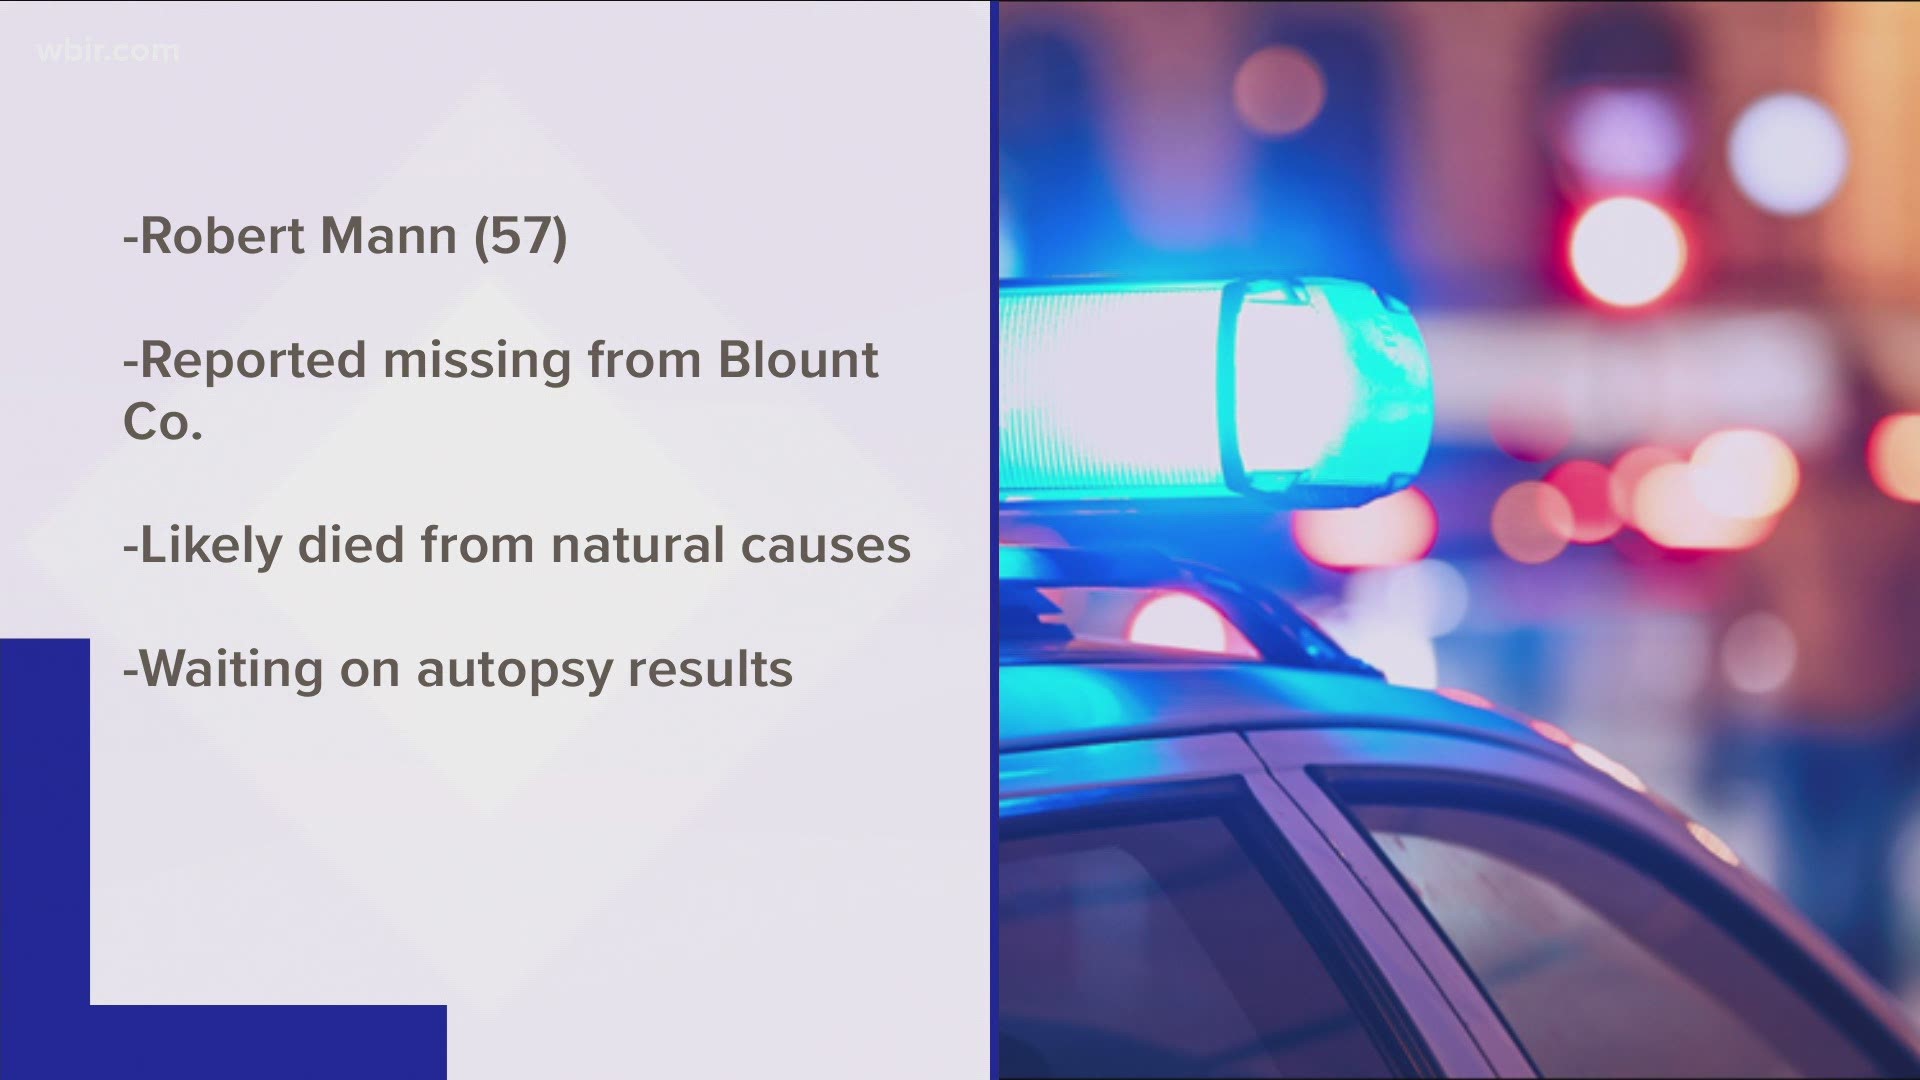 Officials say they found the body Saturday morning and identified the person as 57-year-old Robert Mann who was reported missing from Blount County.